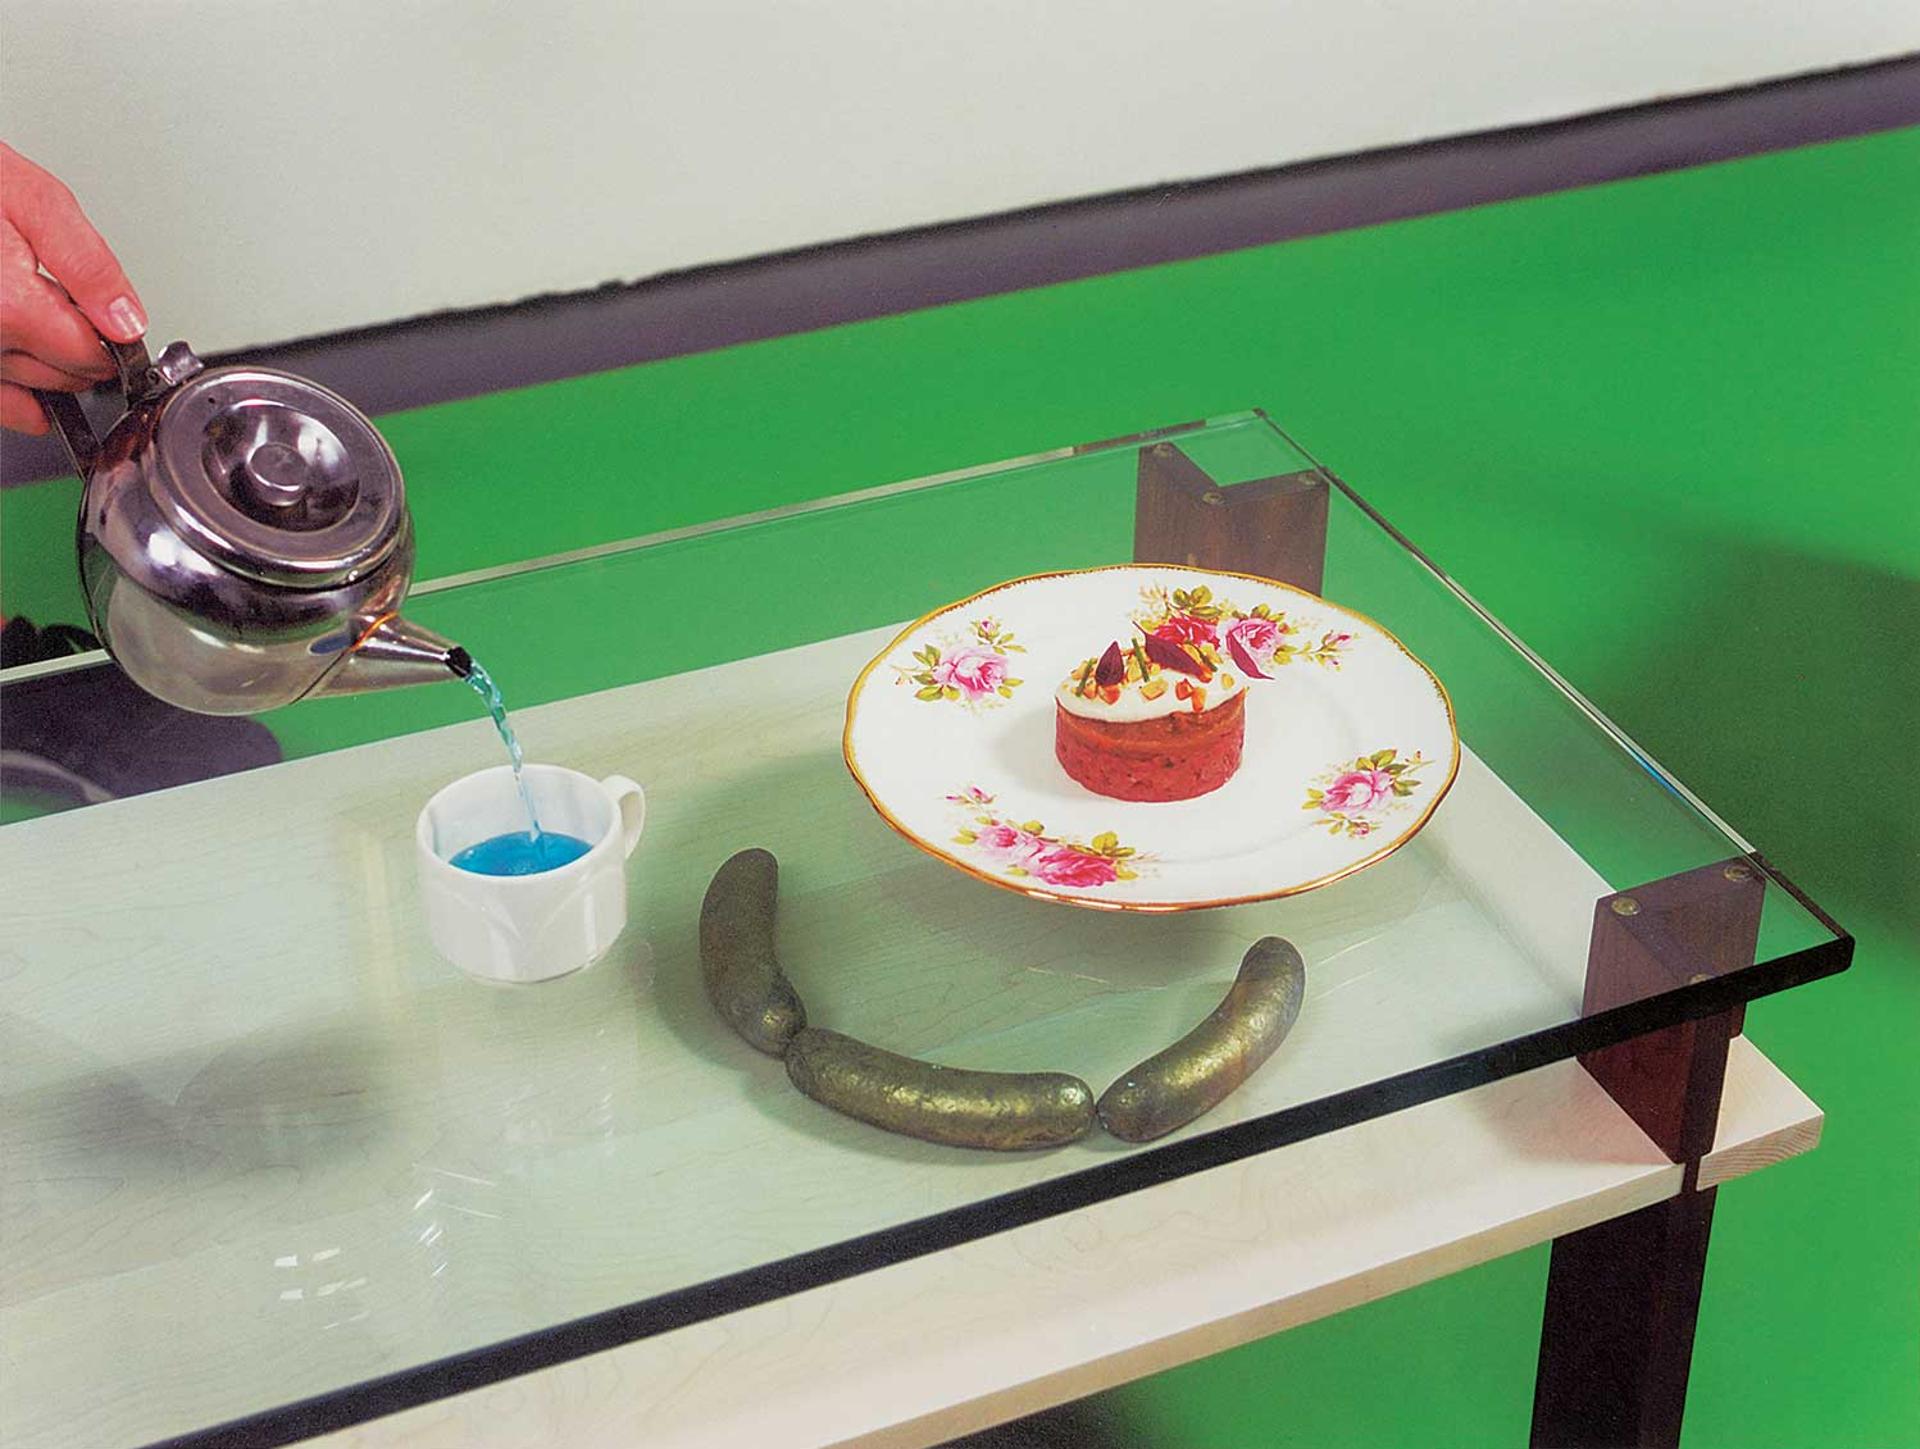 Jeremy Pavka - Untitled - Sausages and Tea